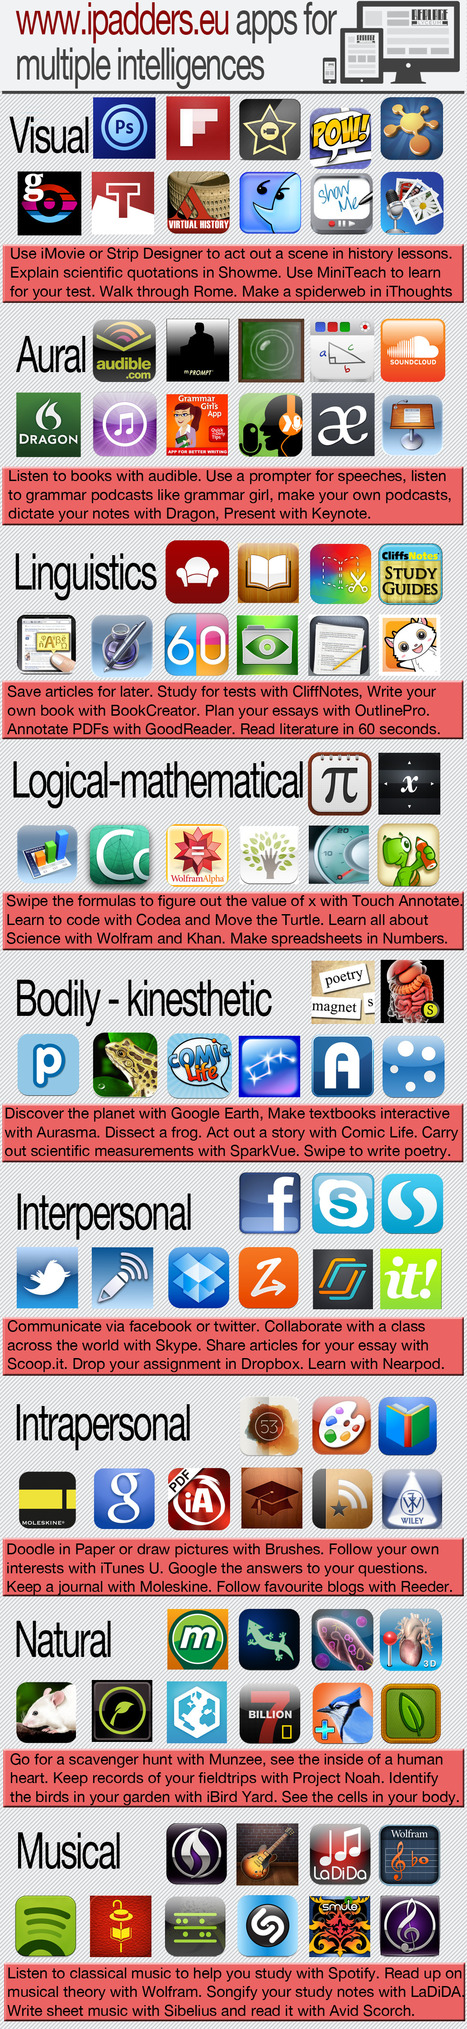 iPad Apps for Multiple Intelligences | Everything iPads | Scoop.it